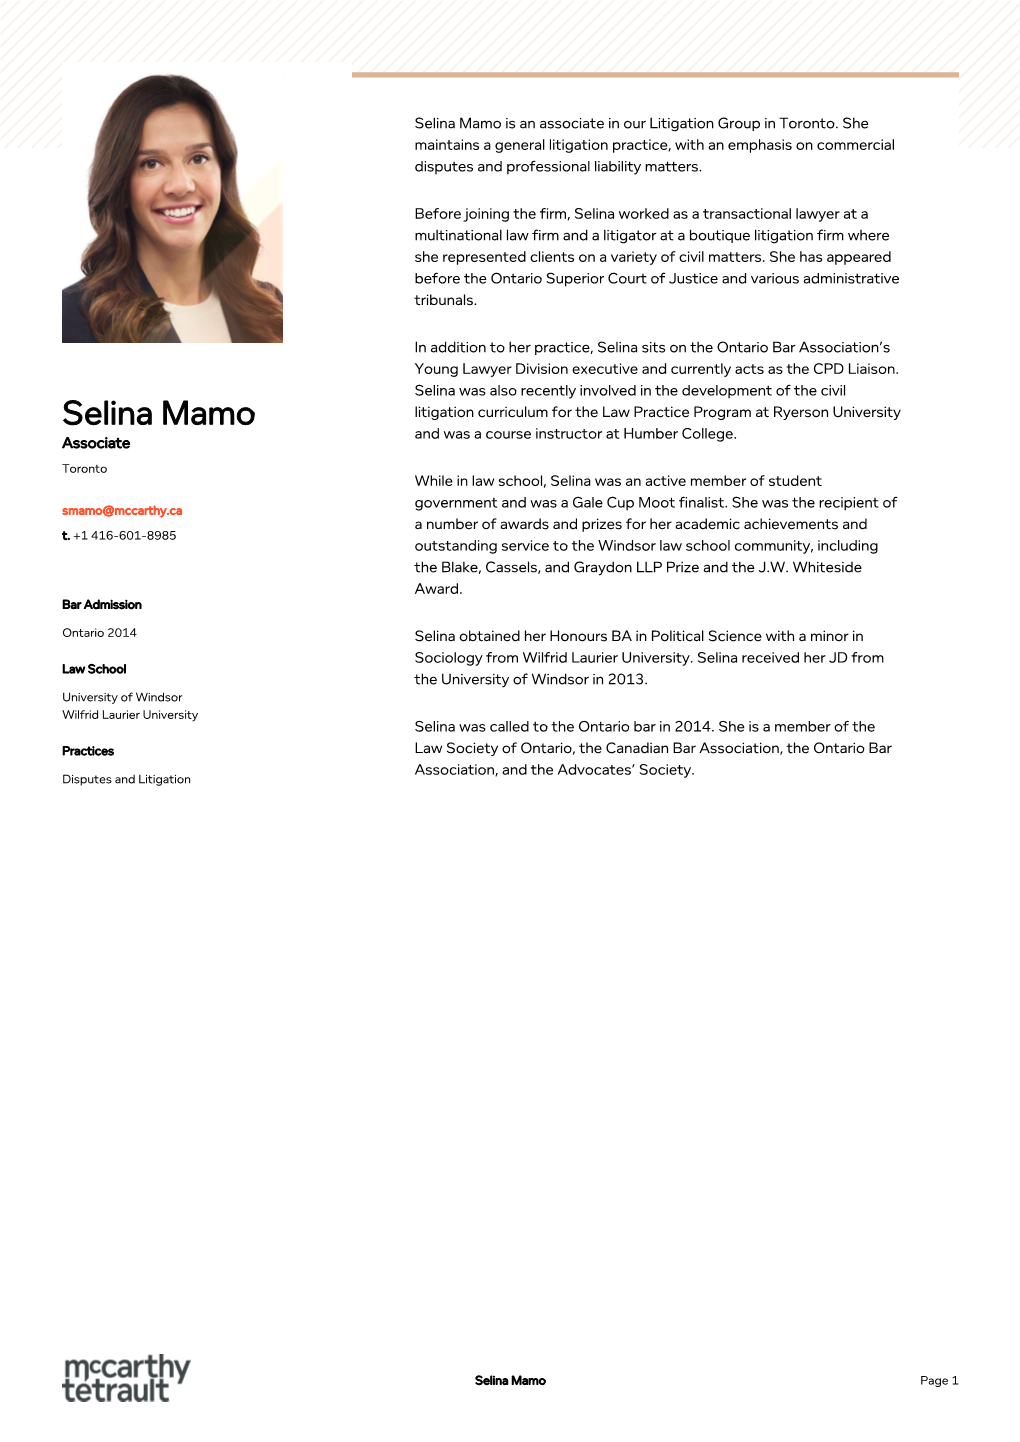 Selina Mamo Is an Associate in Our Litigation Group in Toronto